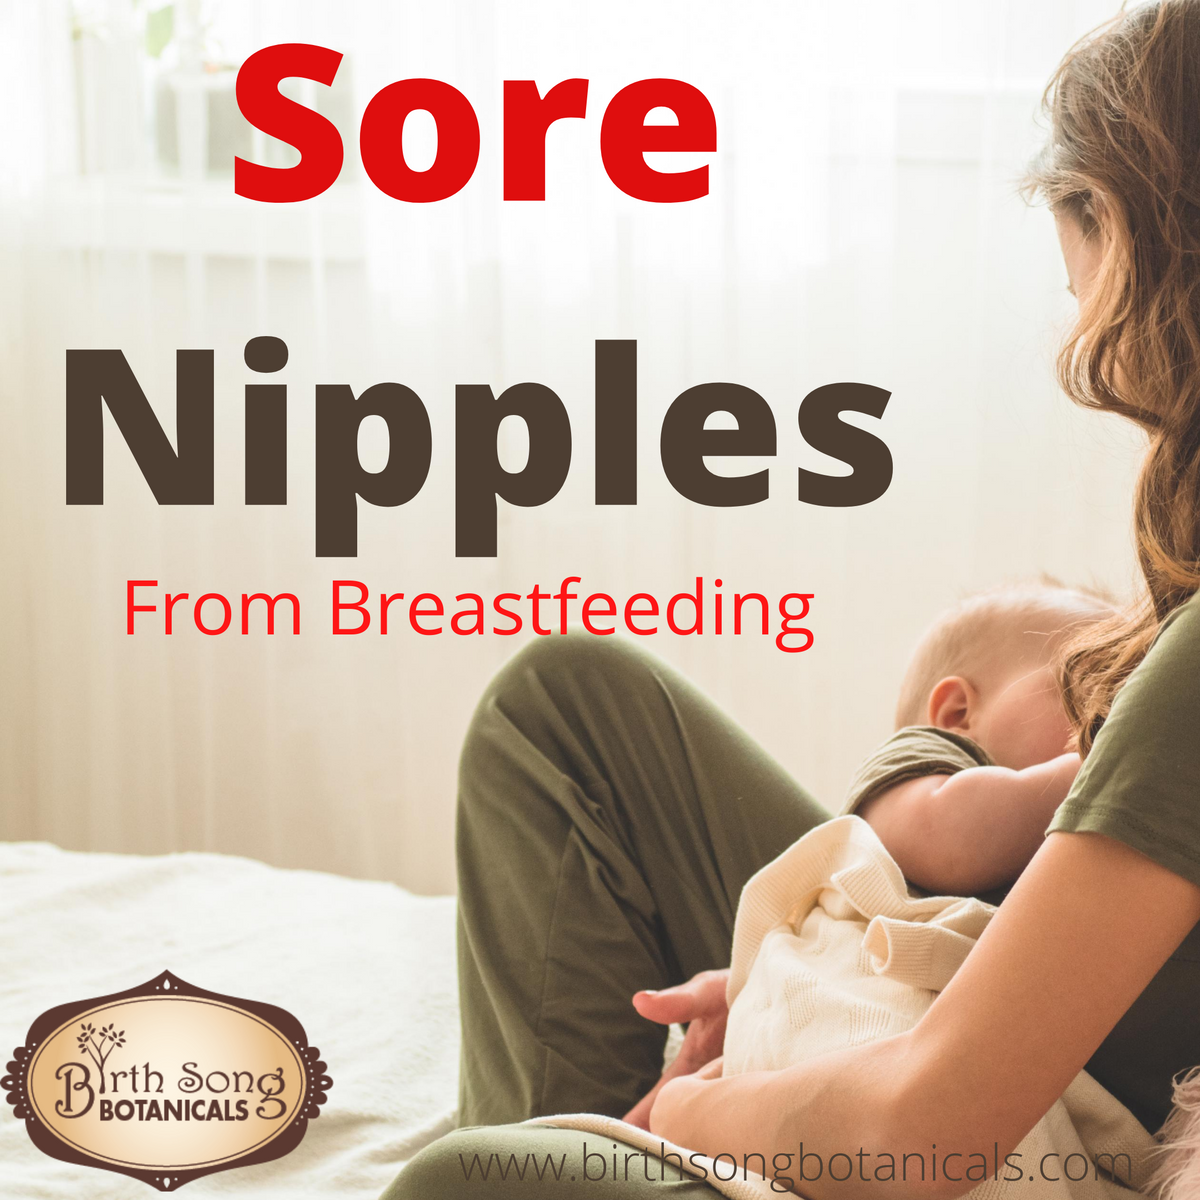 How to Heal Sore Nipples from Breastfeeding– Birth Song Botanicals Co.